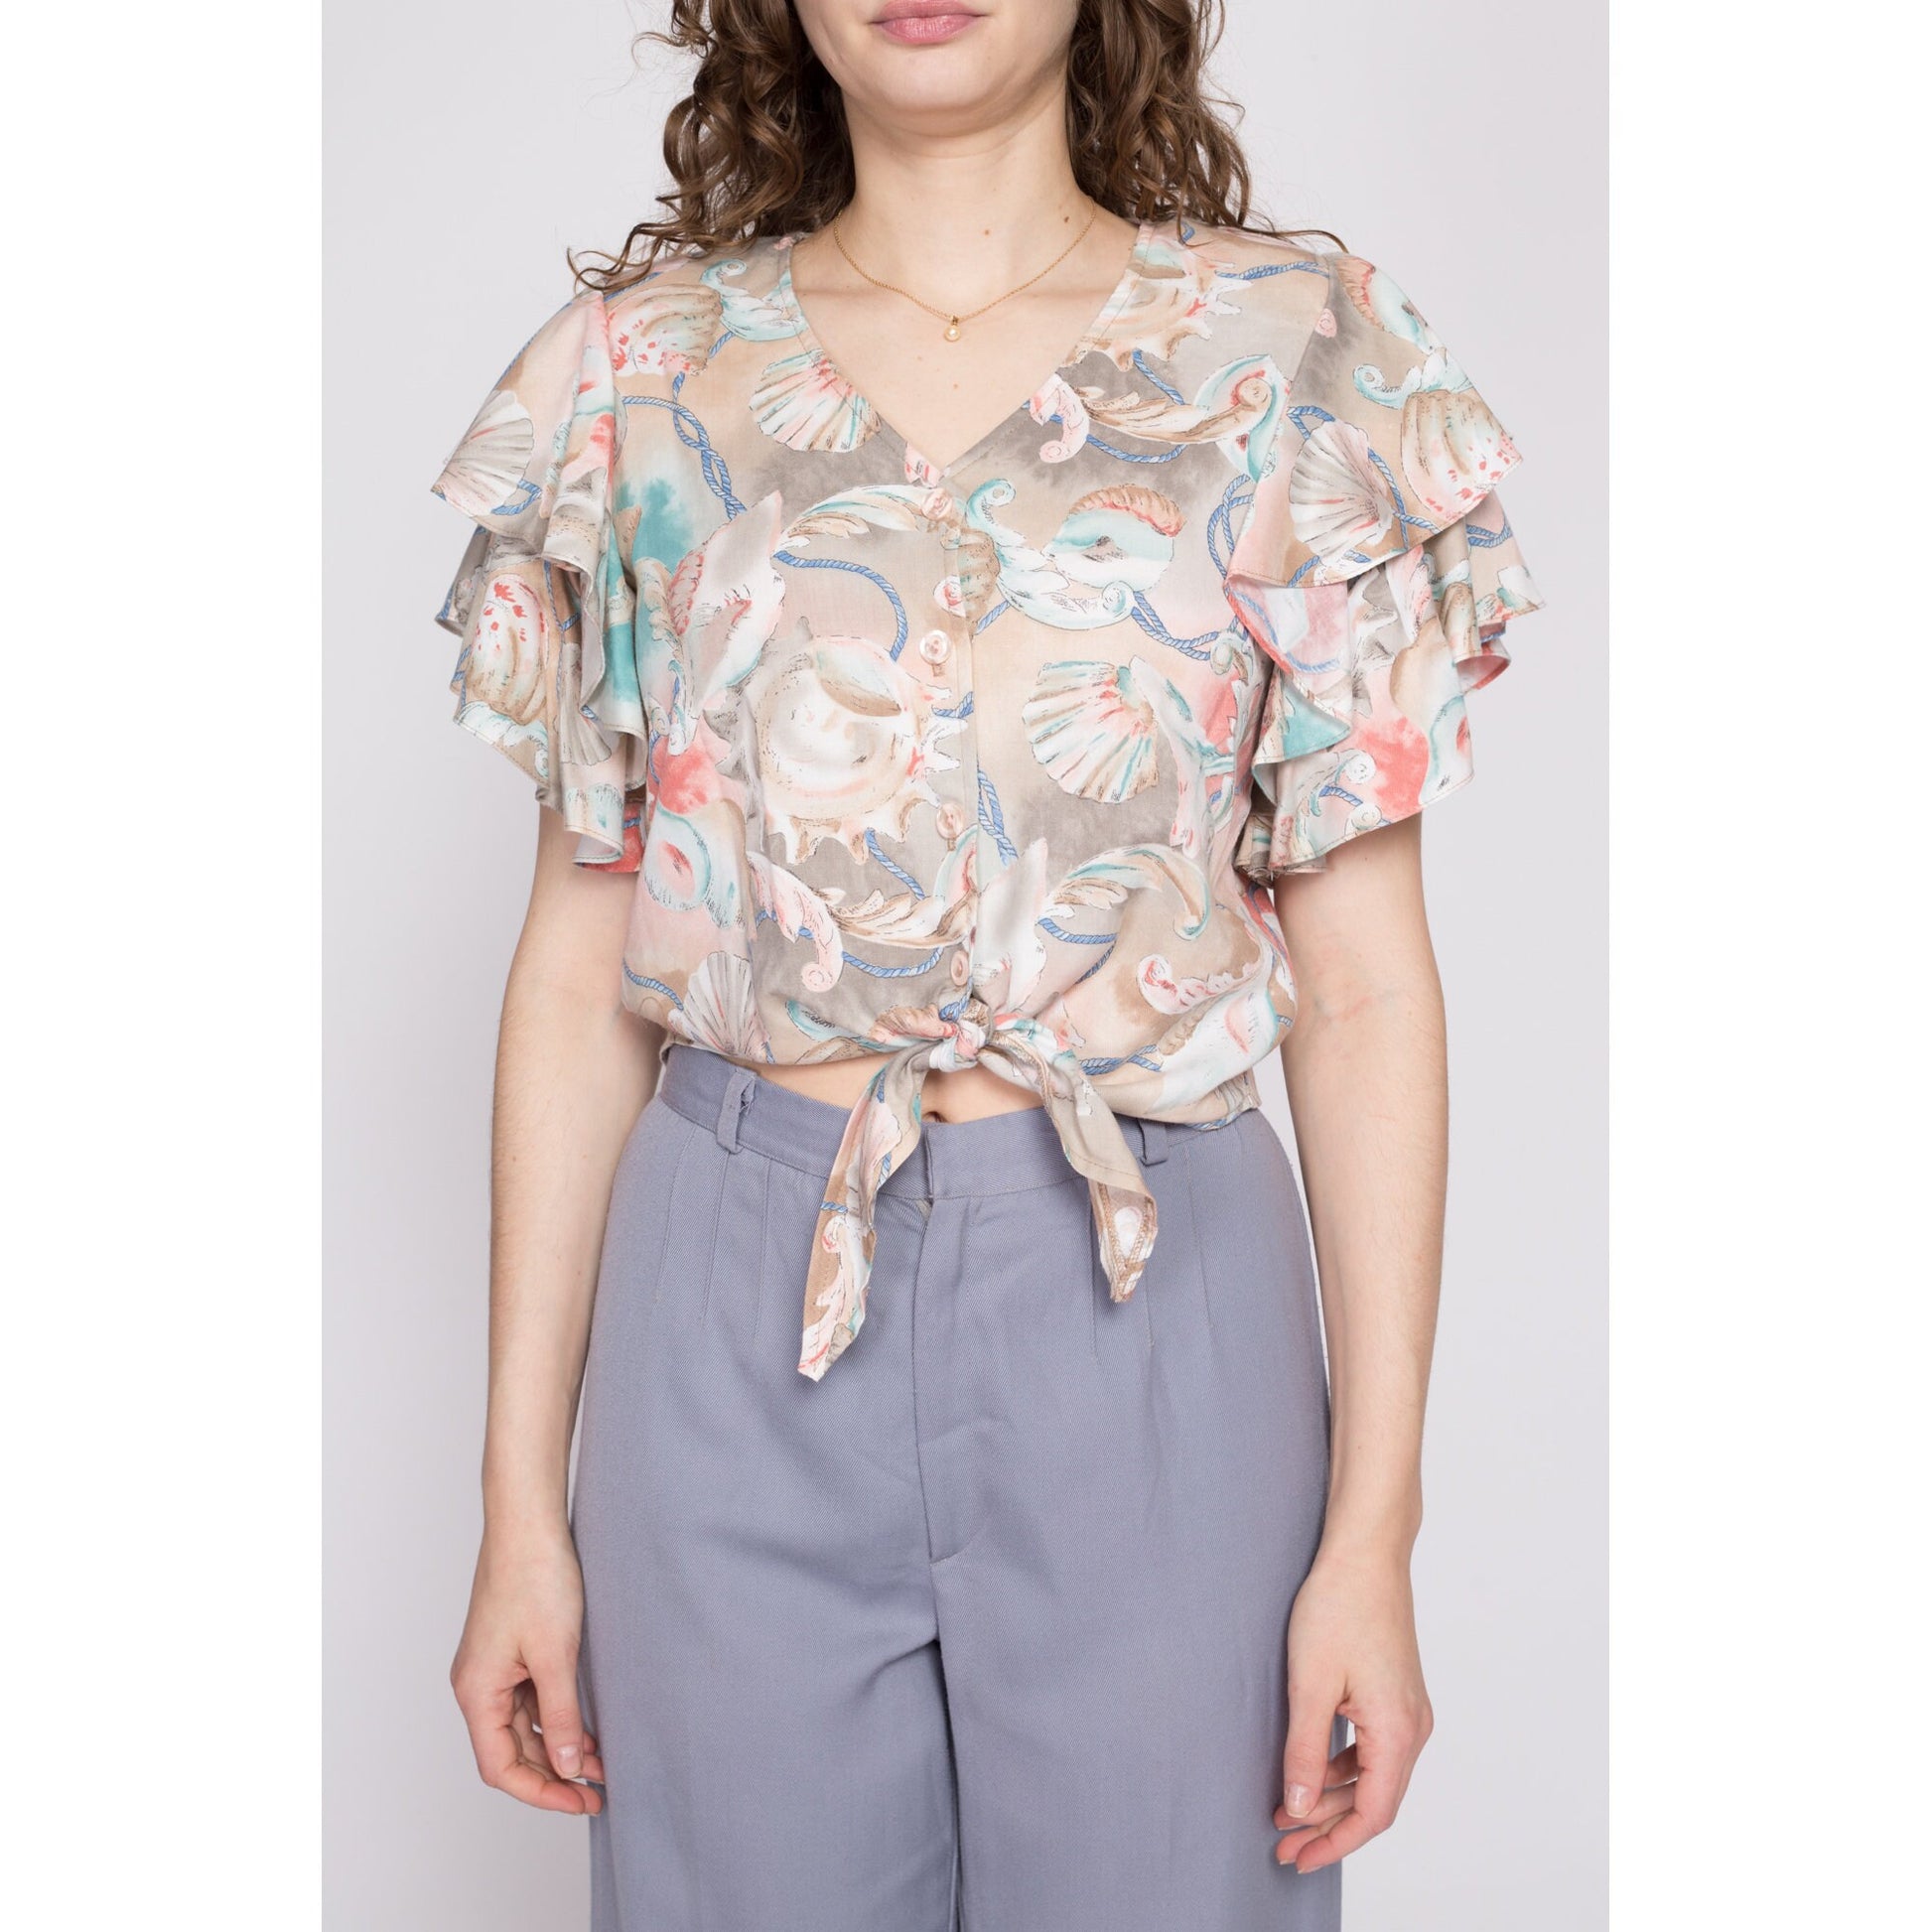 80s 90s Seashell Novelty Print Tie Front Crop Top - Small to Medium | Vintage Ruffle Puff Sleeve Button Up Cropped Shirt